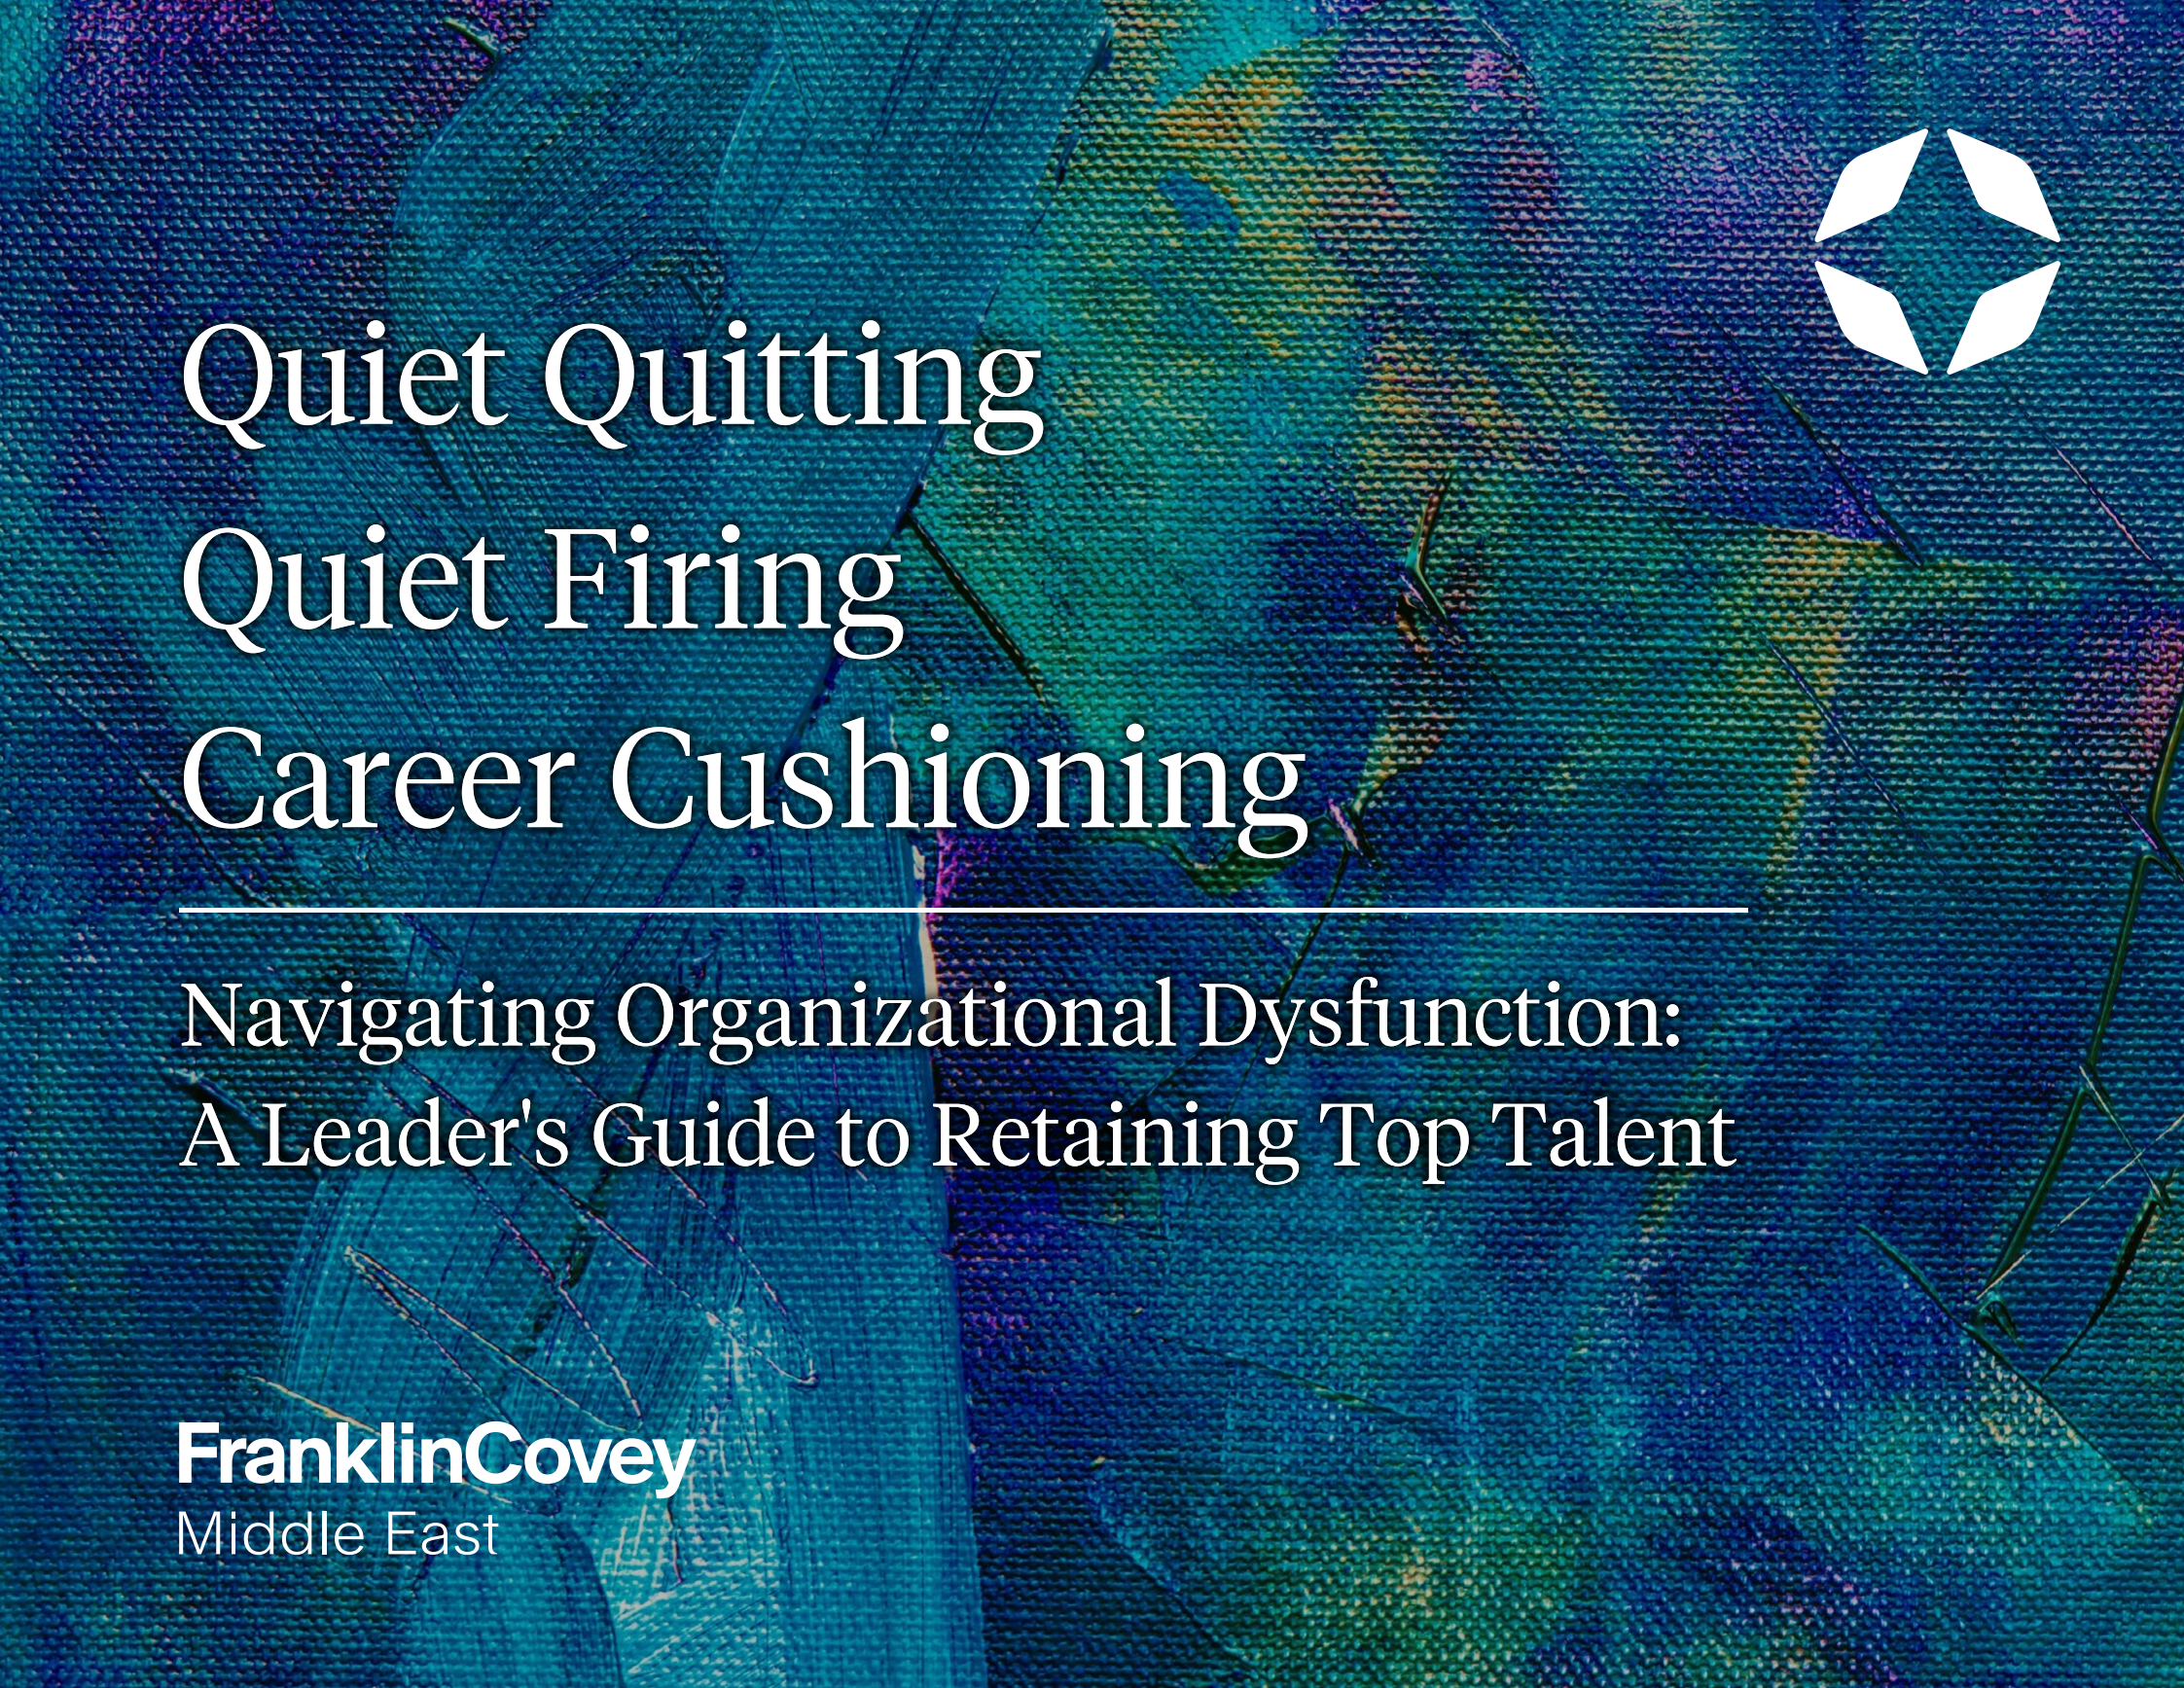 Whitepaper: Navigating Organizational Dysfunction: A Leader's Guide To Retaining Top Talent  